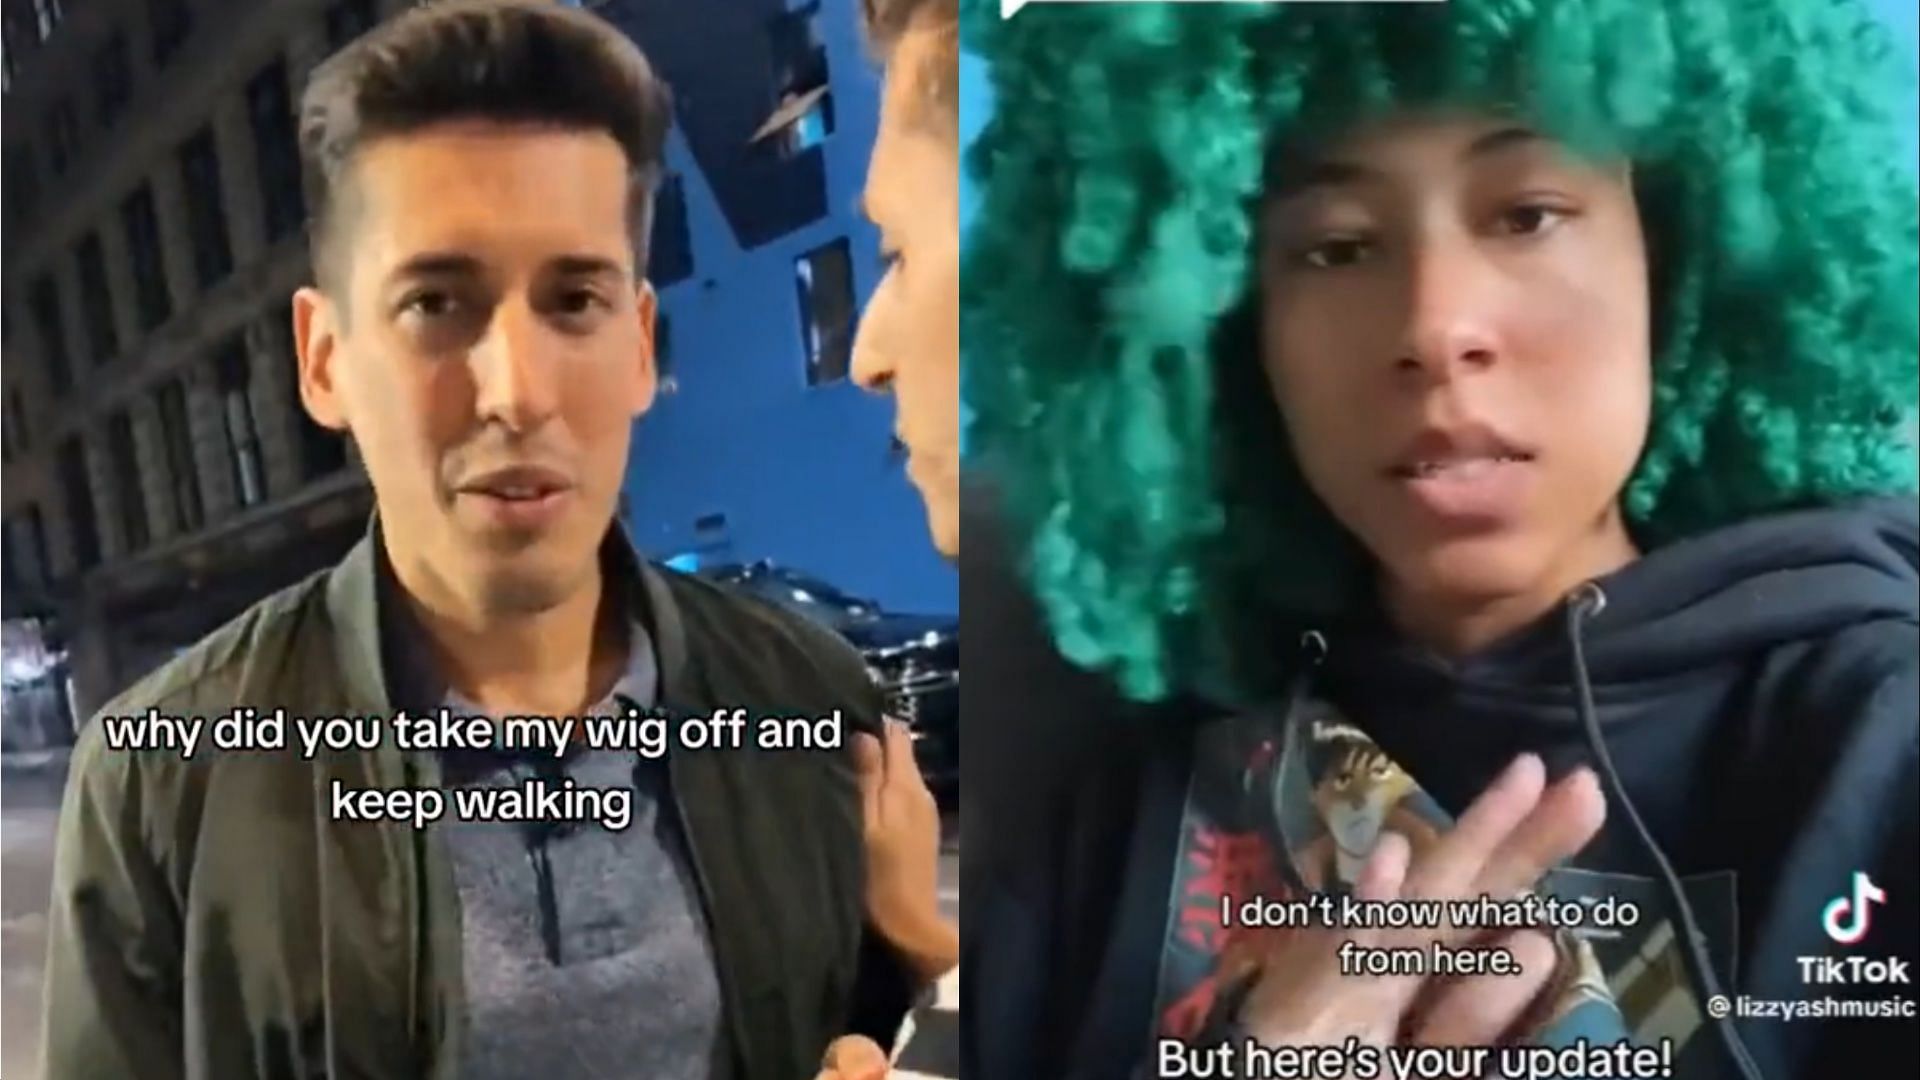 Attorney comes under fire for pulling wig off of Black woman (Image via lizzyashmusic/TikTok)